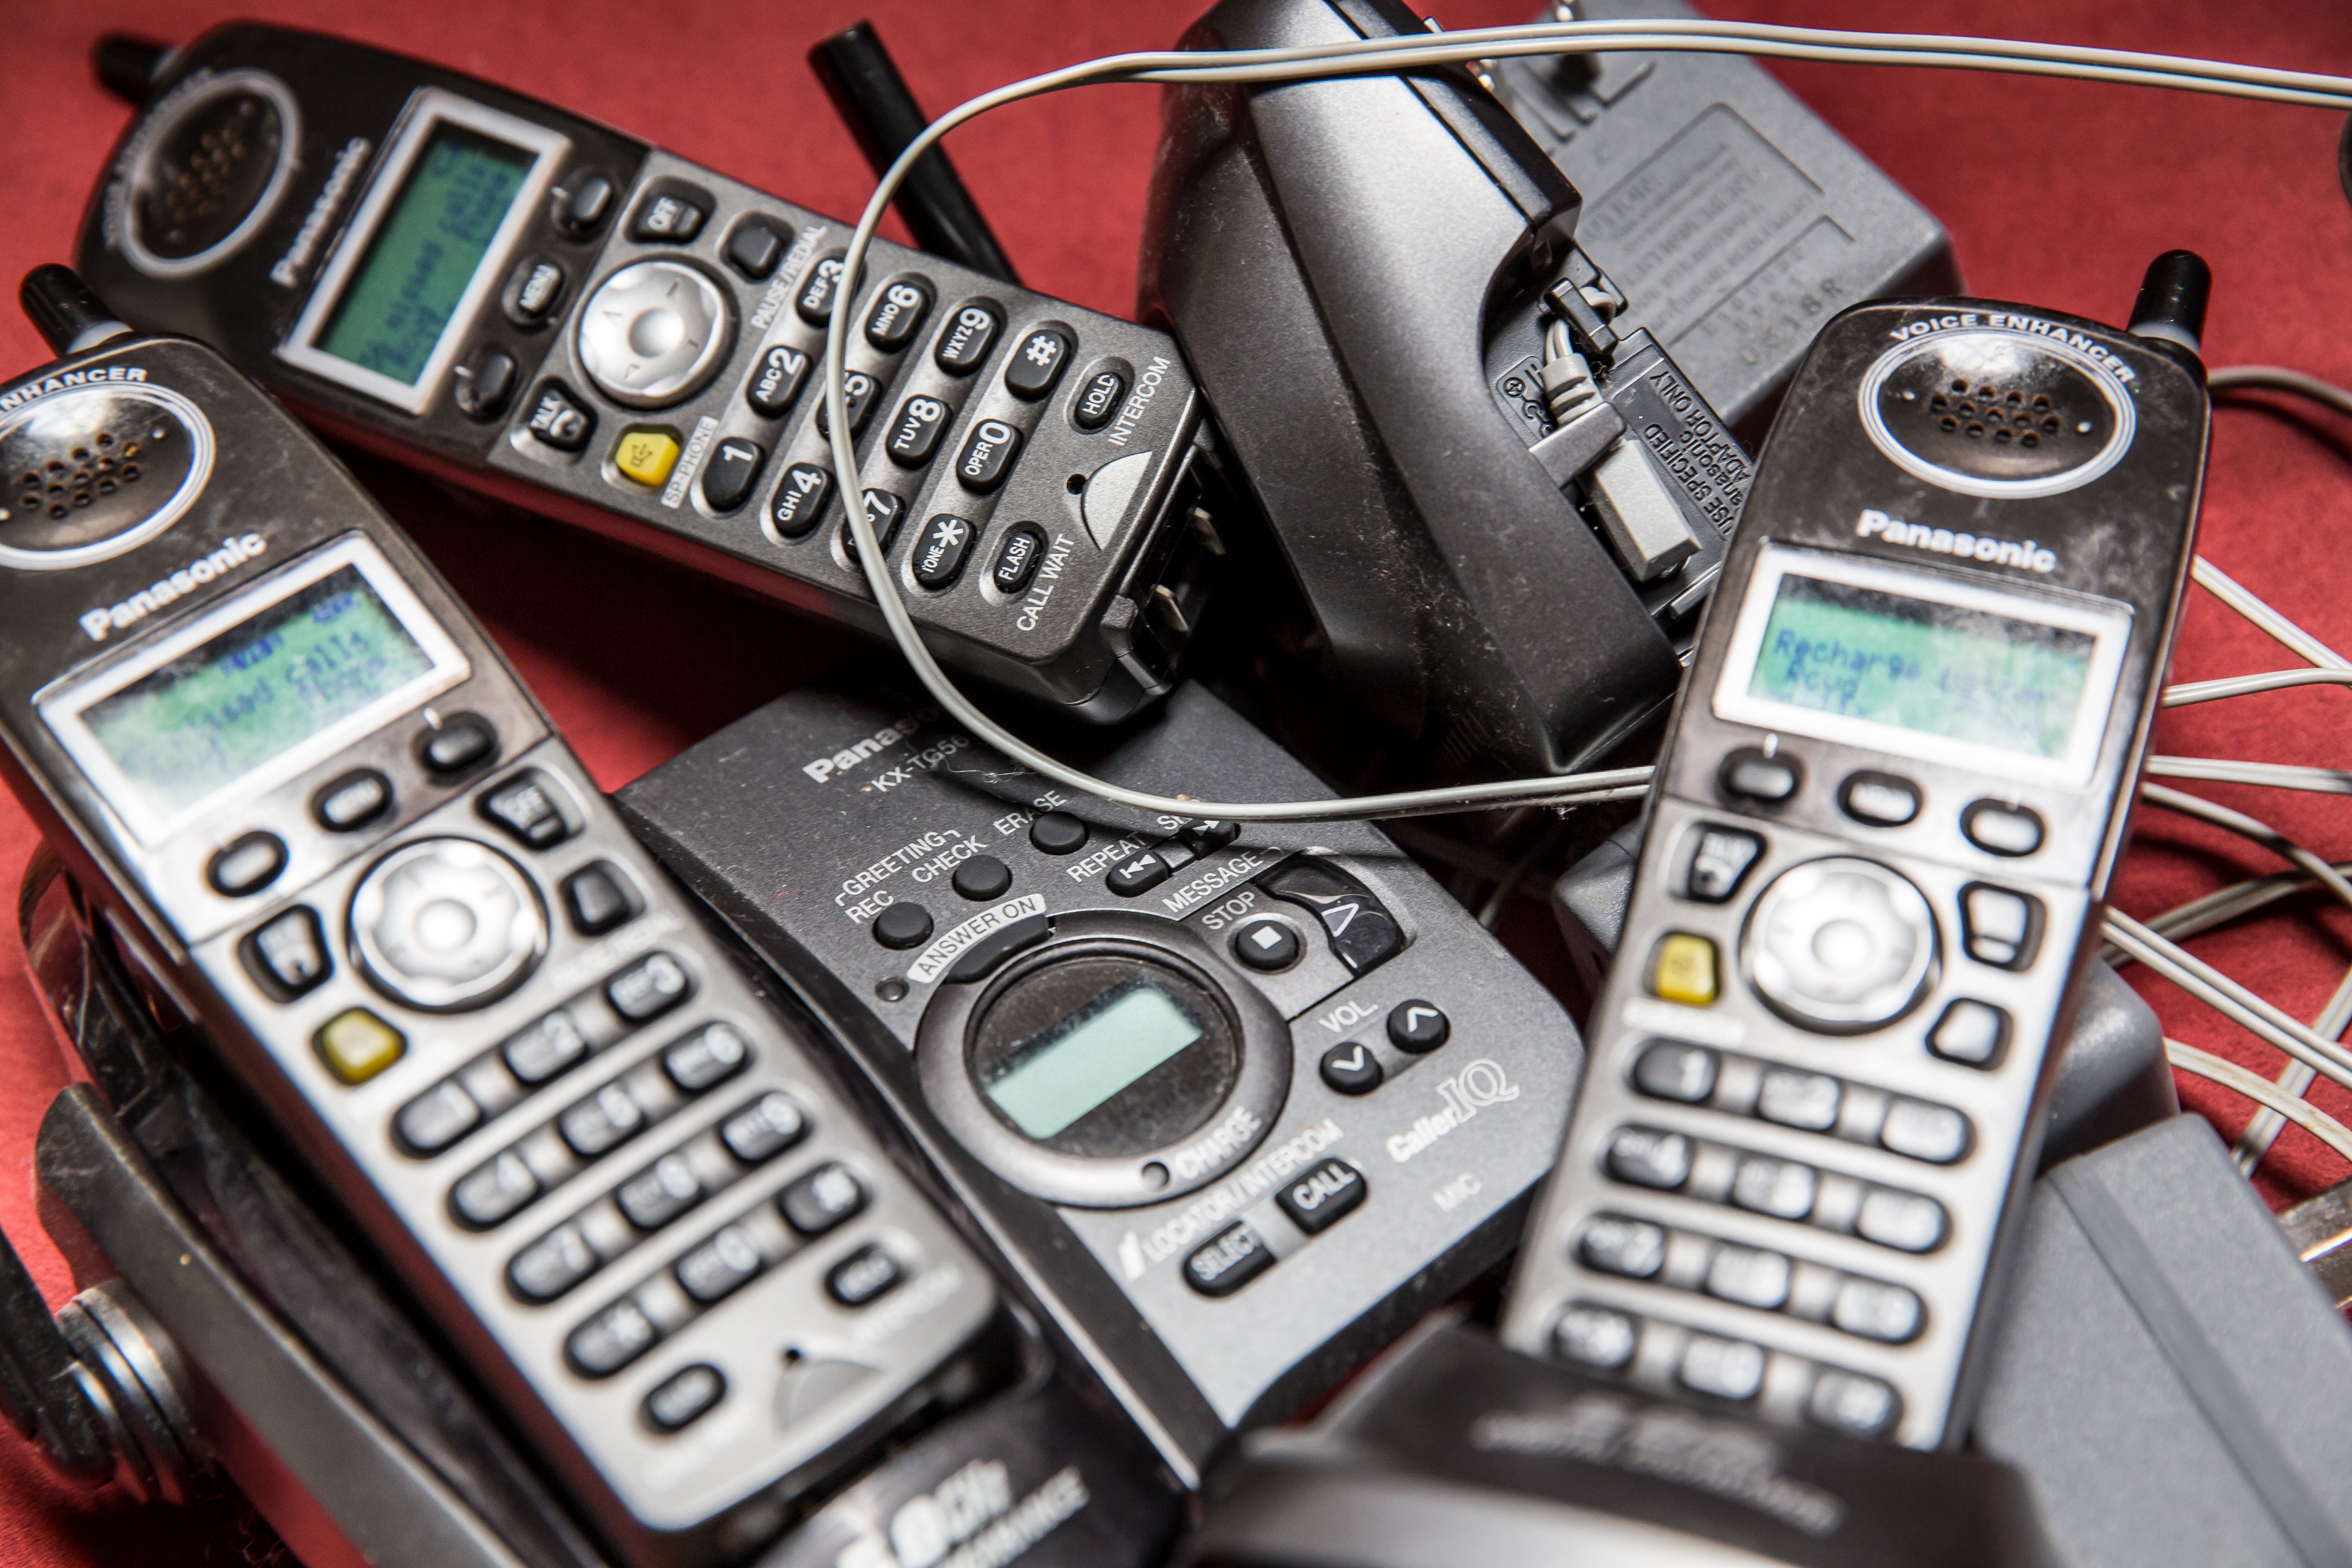 Pile of Old Cordless Style Landline Panasonic Telephones and Their Bases (Julie Thurston Photography—Moment Editorial/Getty Images)